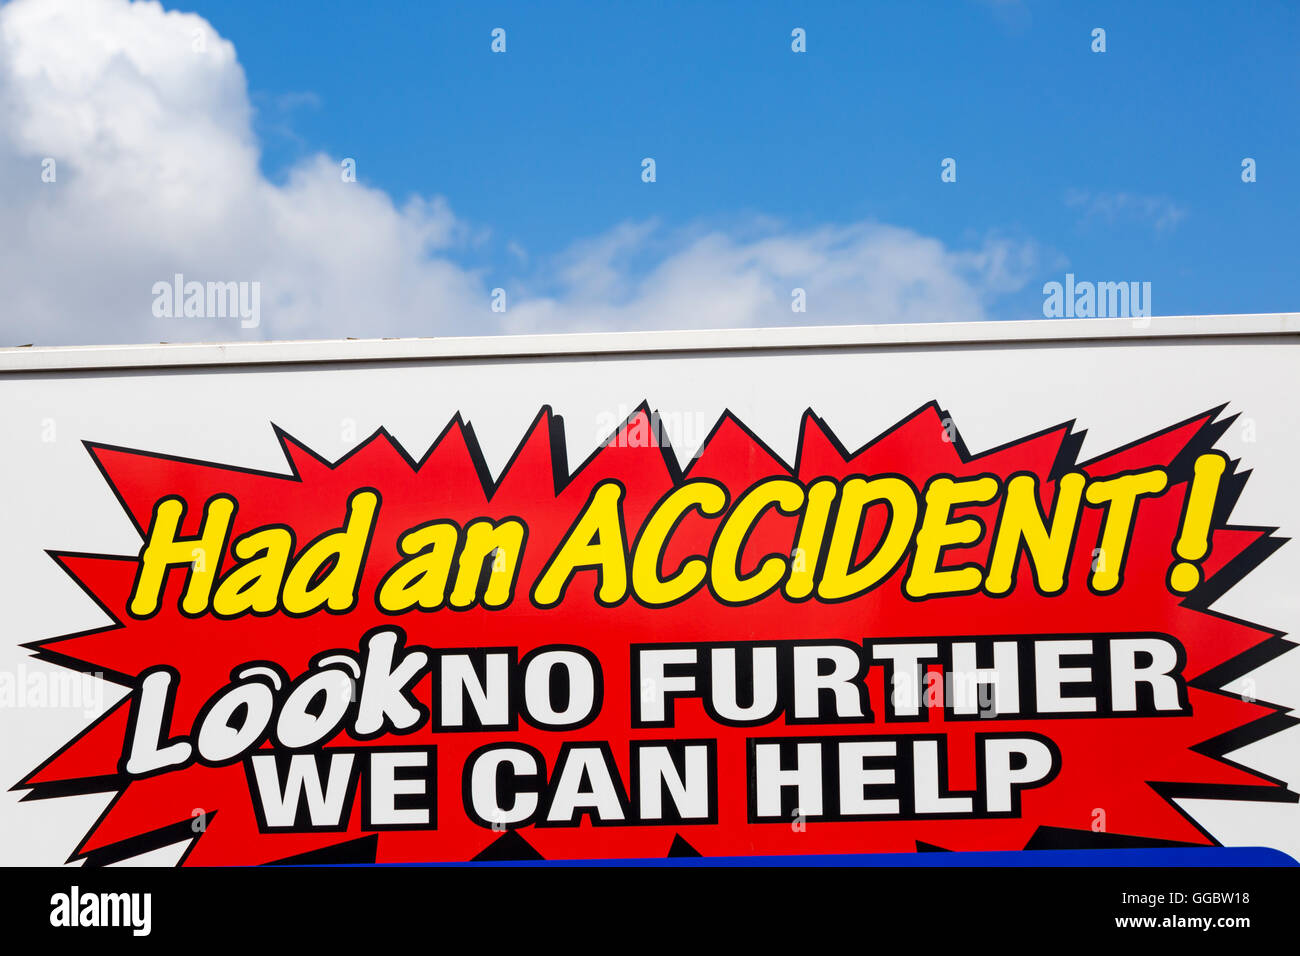 Had an accident look no further we can help banner sign at London in July Stock Photo